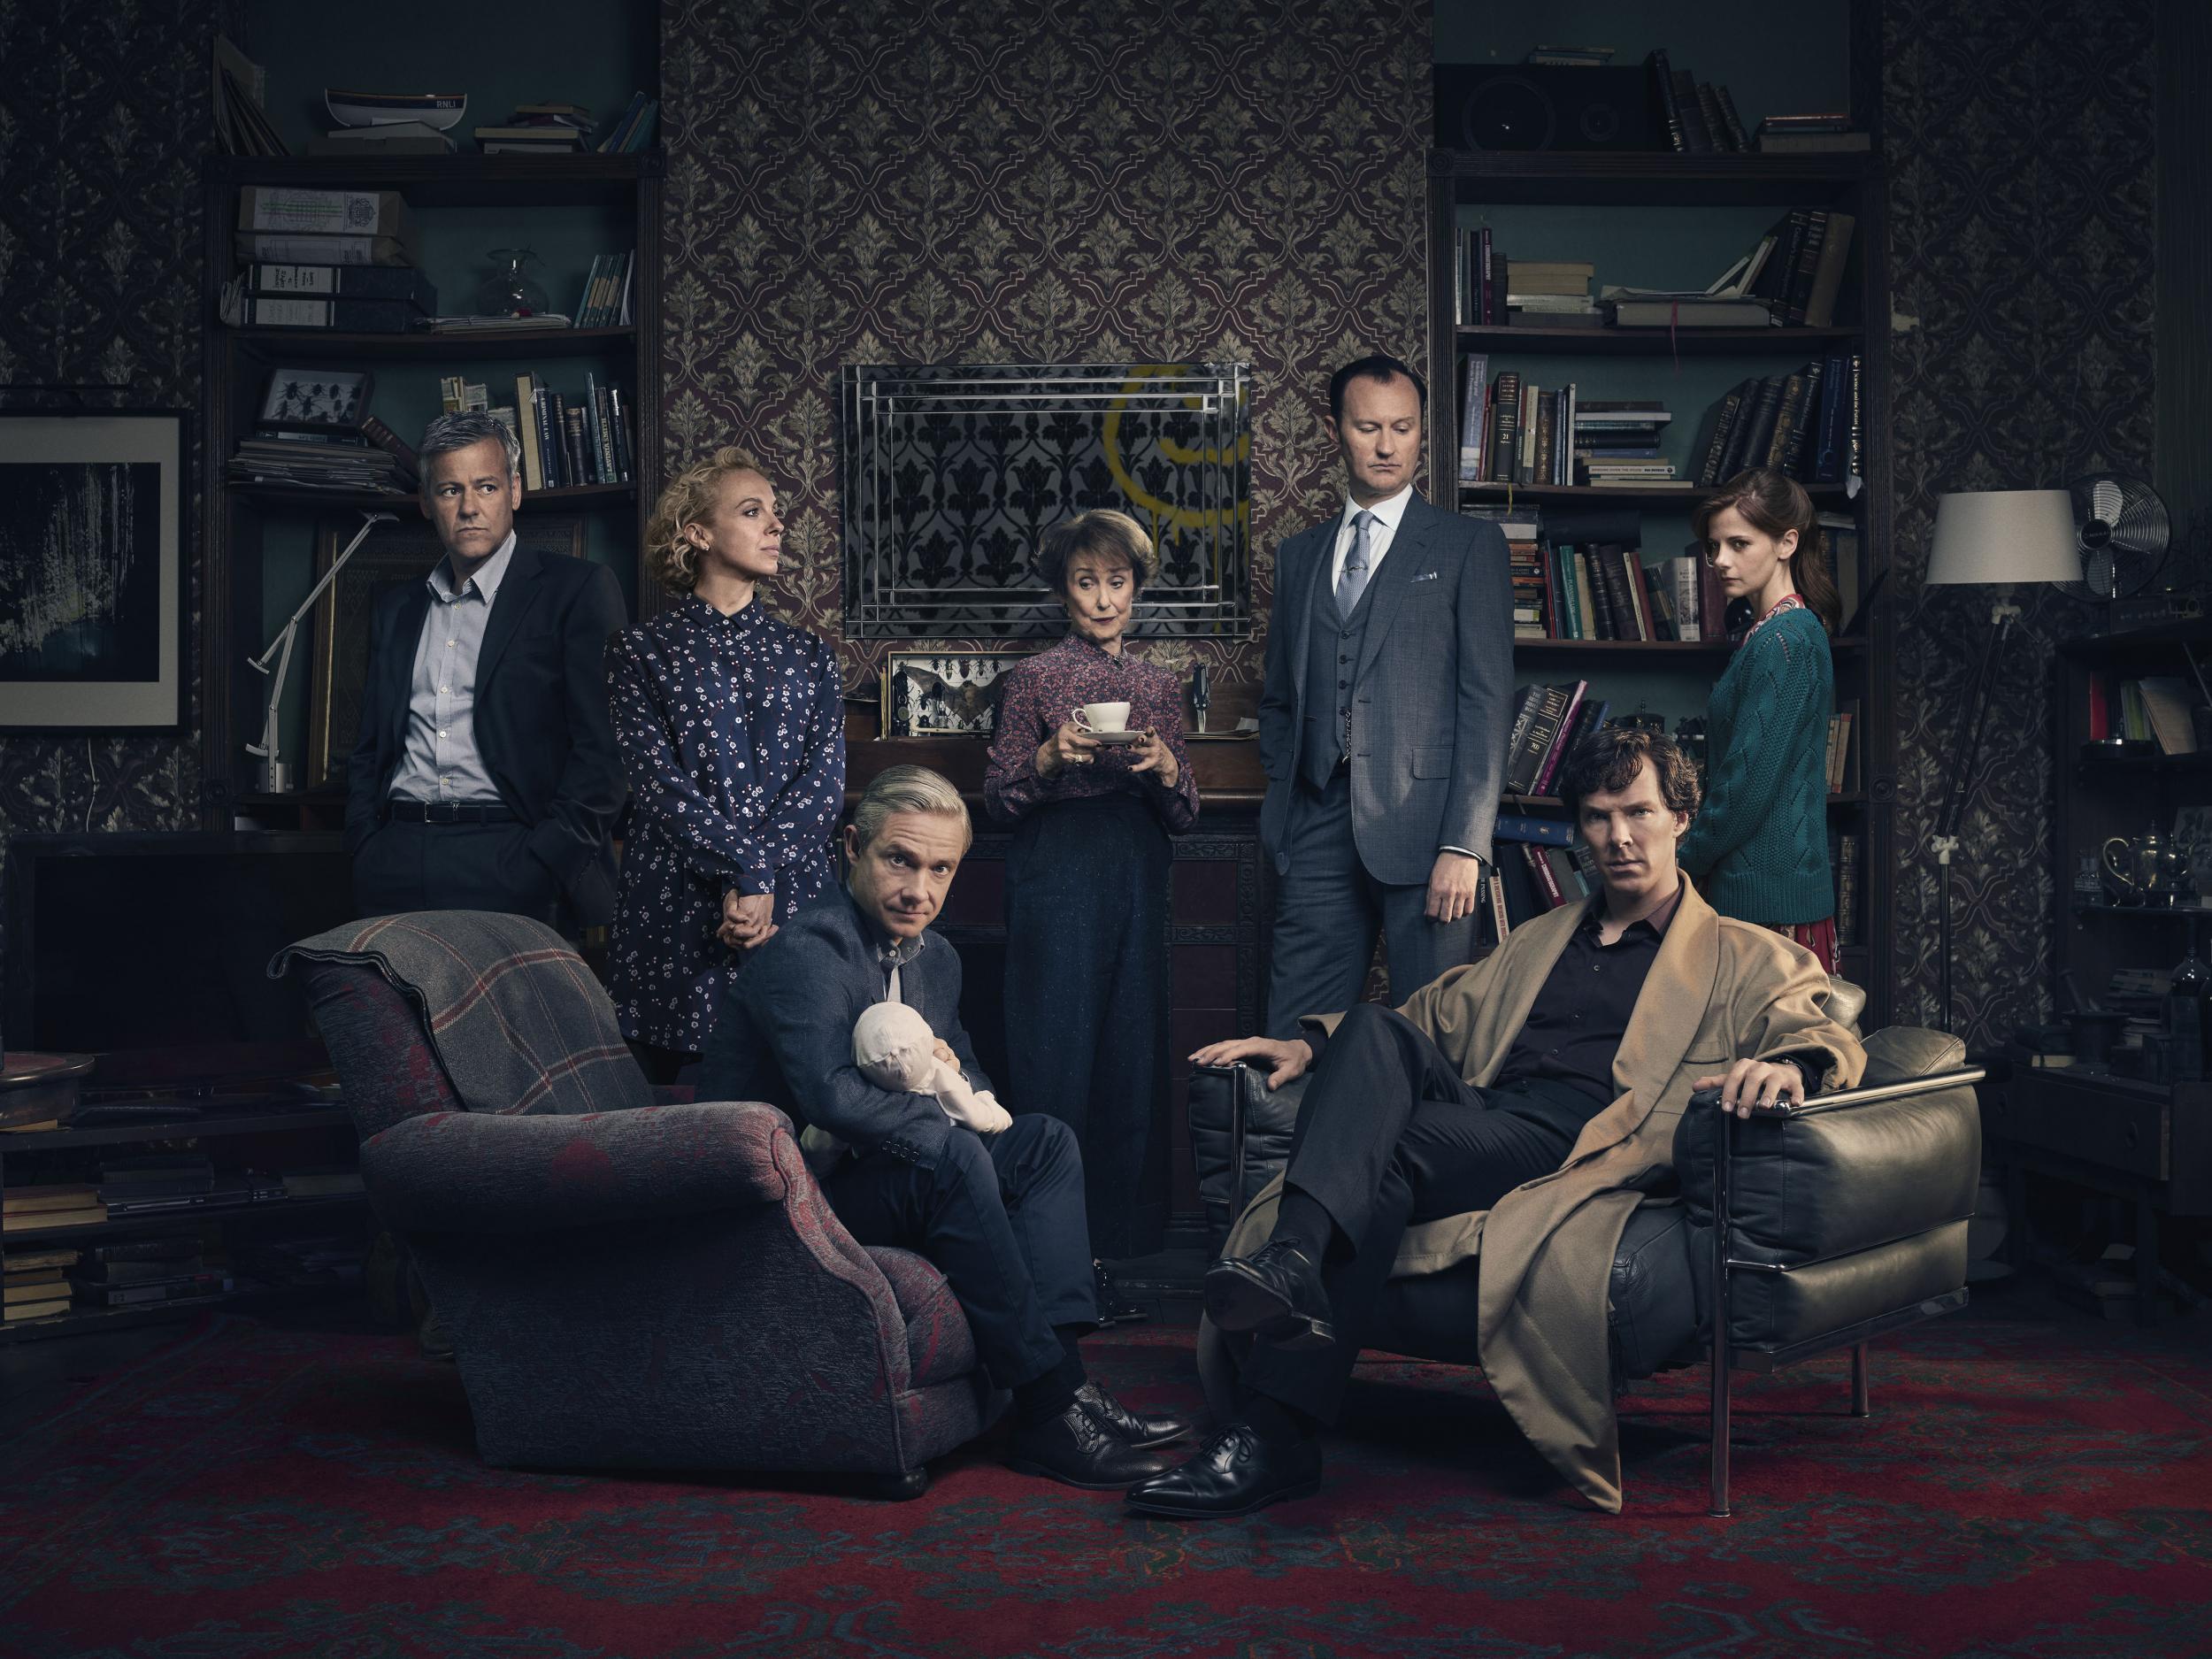 Sherlock Season Finale Illegally Leaked Online Before Airing On Images, Photos, Reviews